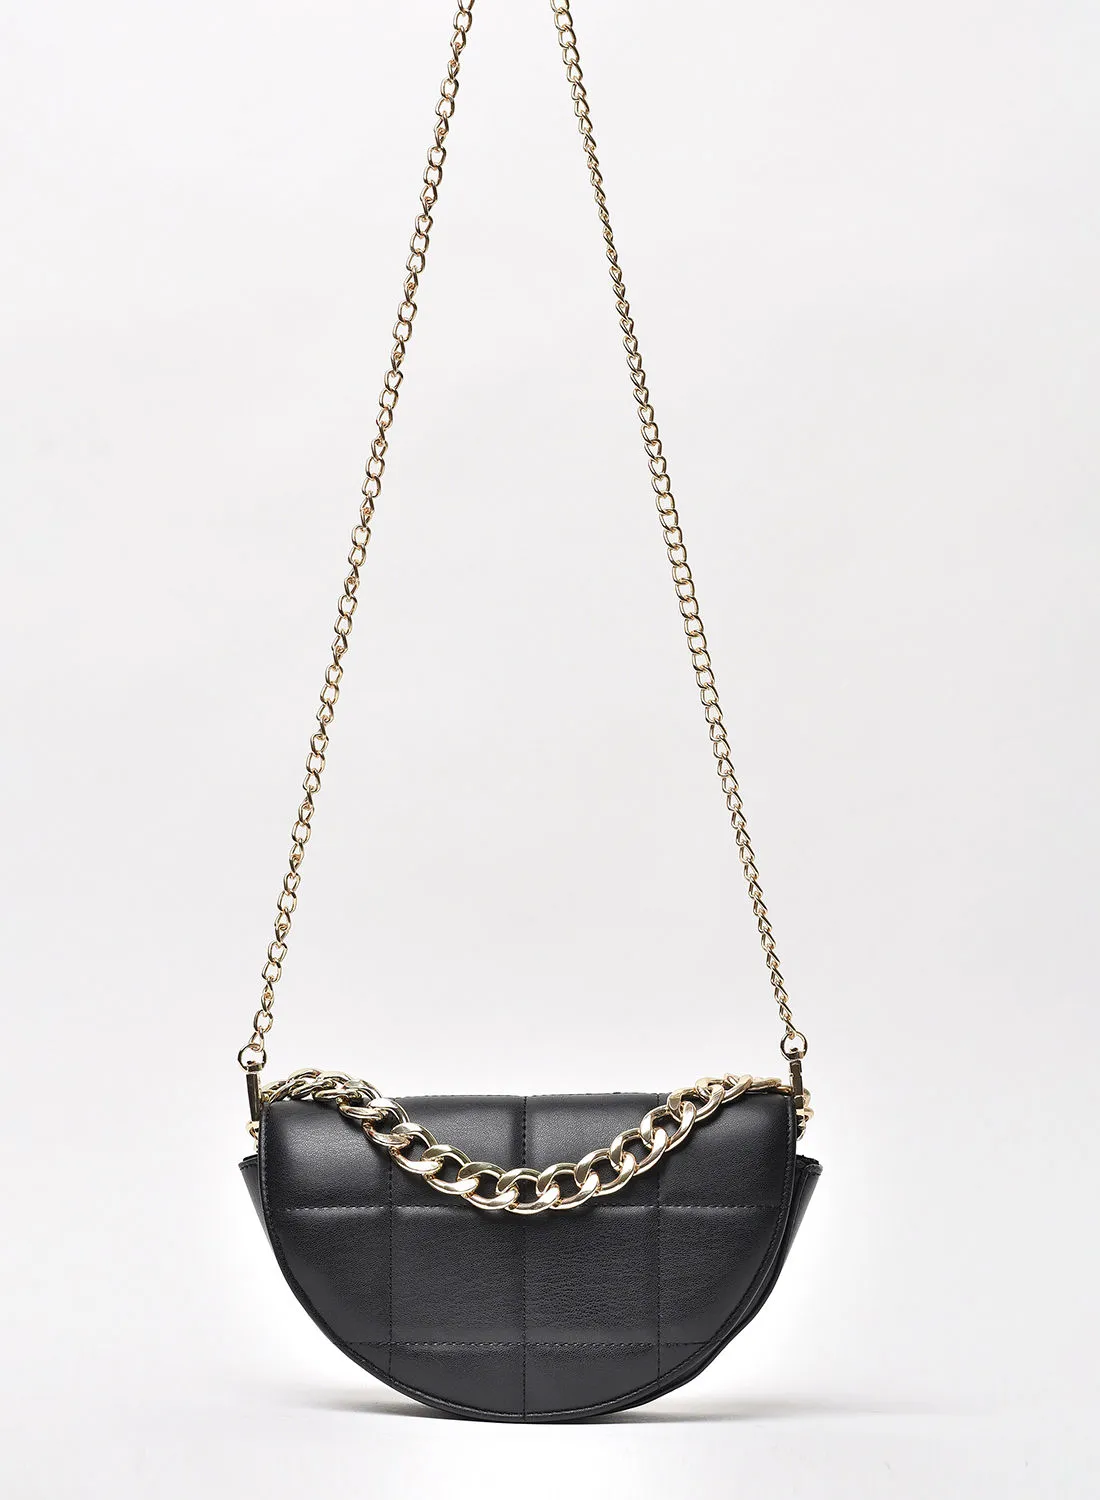 Jove Quilted Pattern Chain Strap Stylish Crossbody Bag Black